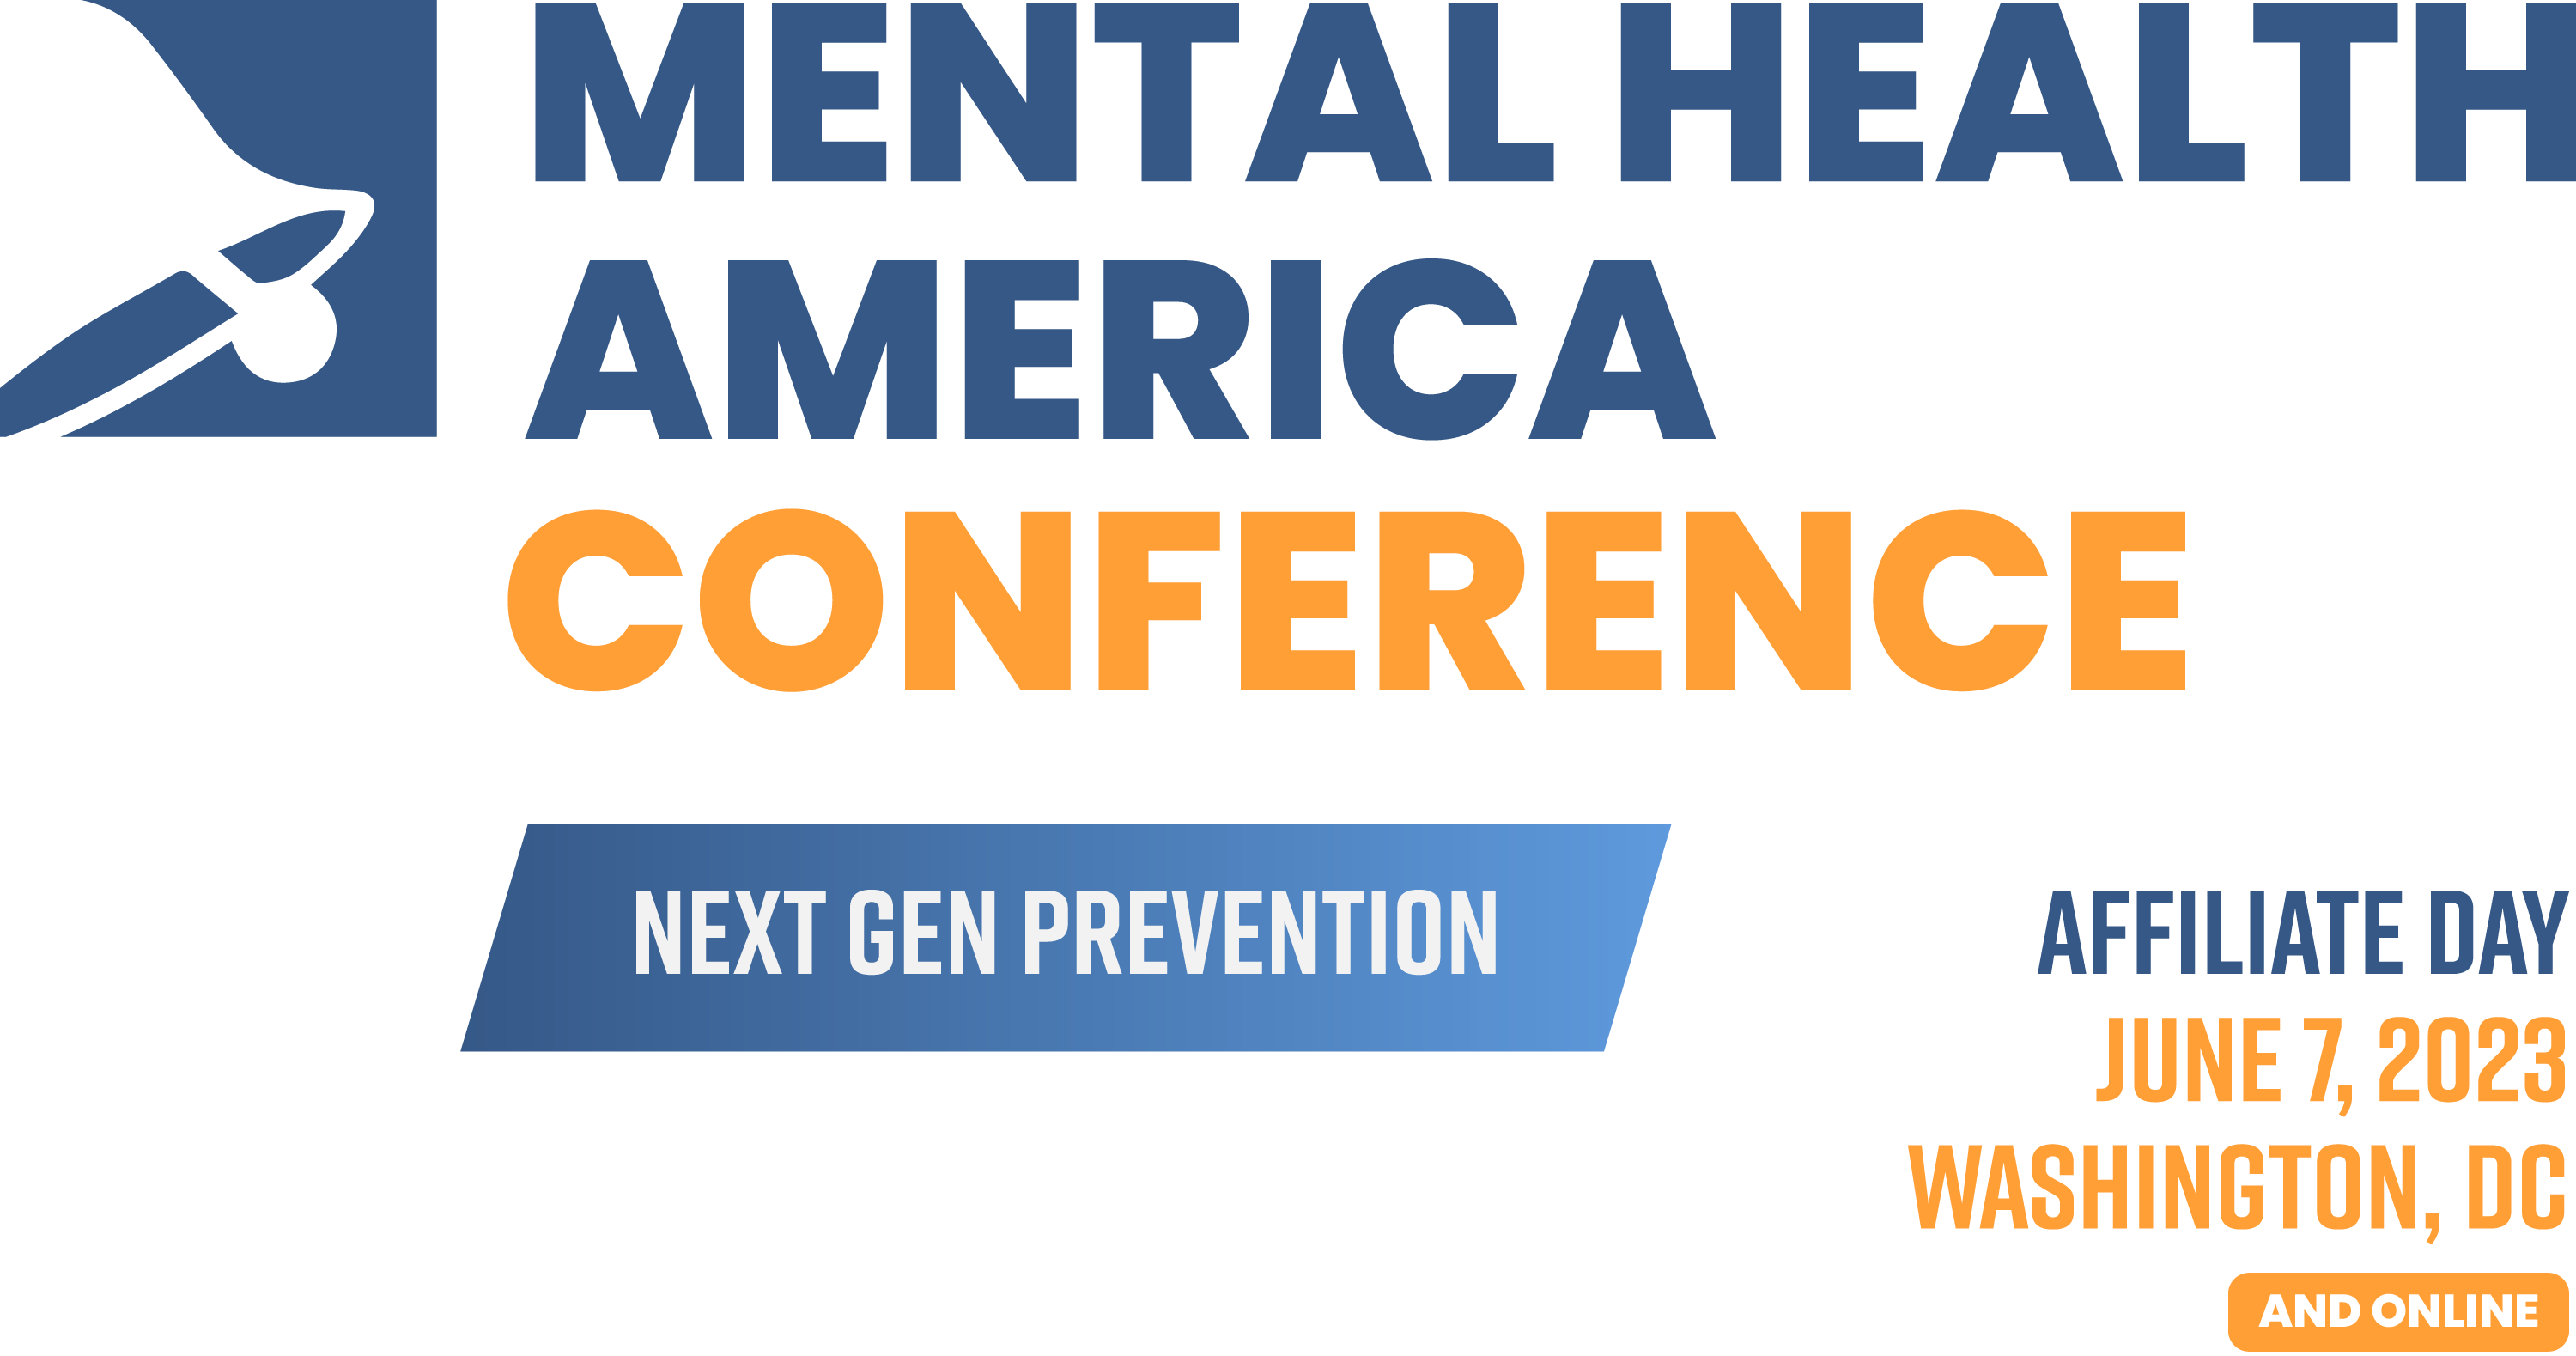 Mental Health America Conference | Next Gen Prevention | Affiliate Day | June 7, 2023 | Washington, DC and Online